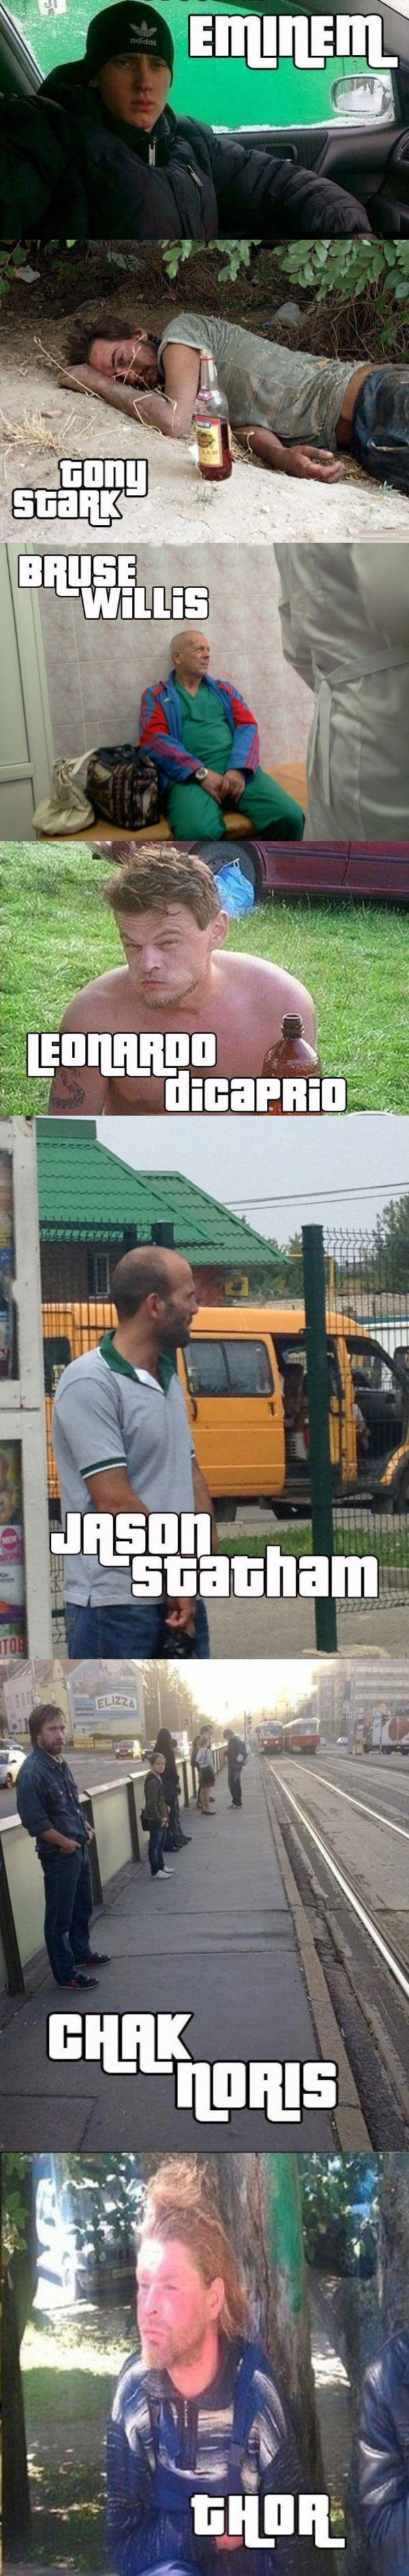 celebrity doppelganger in russia, actor look a likes